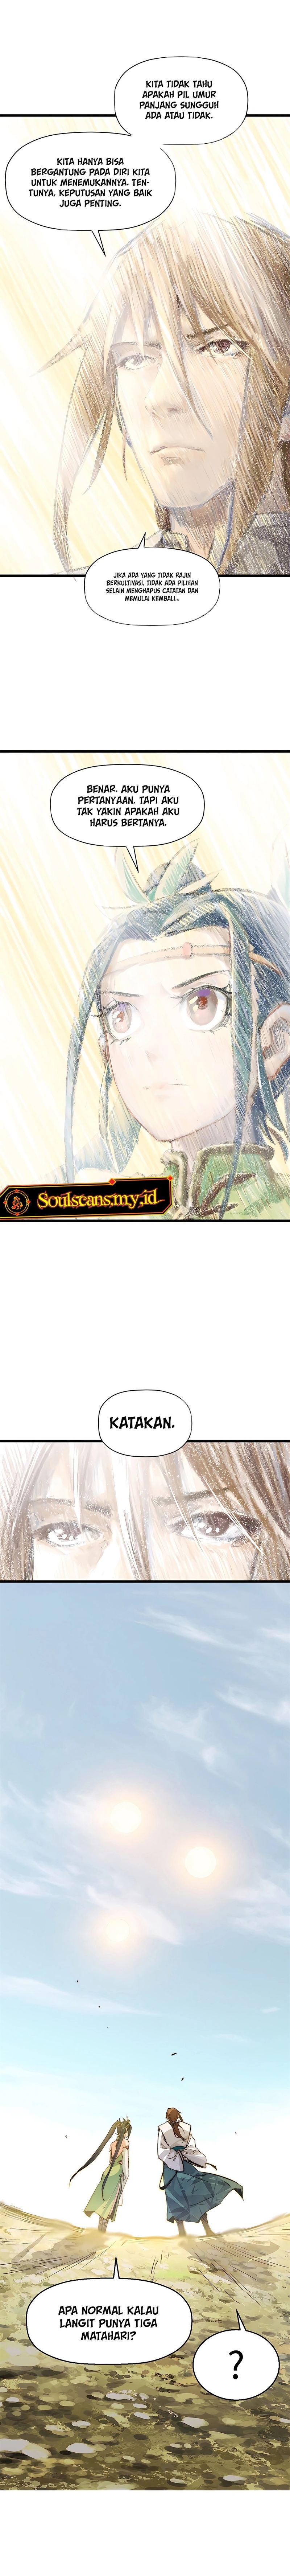 Dilarang COPAS - situs resmi www.mangacanblog.com - Komik top tier providence secretly cultivate for a thousand years 138 - chapter 138 139 Indonesia top tier providence secretly cultivate for a thousand years 138 - chapter 138 Terbaru 6|Baca Manga Komik Indonesia|Mangacan